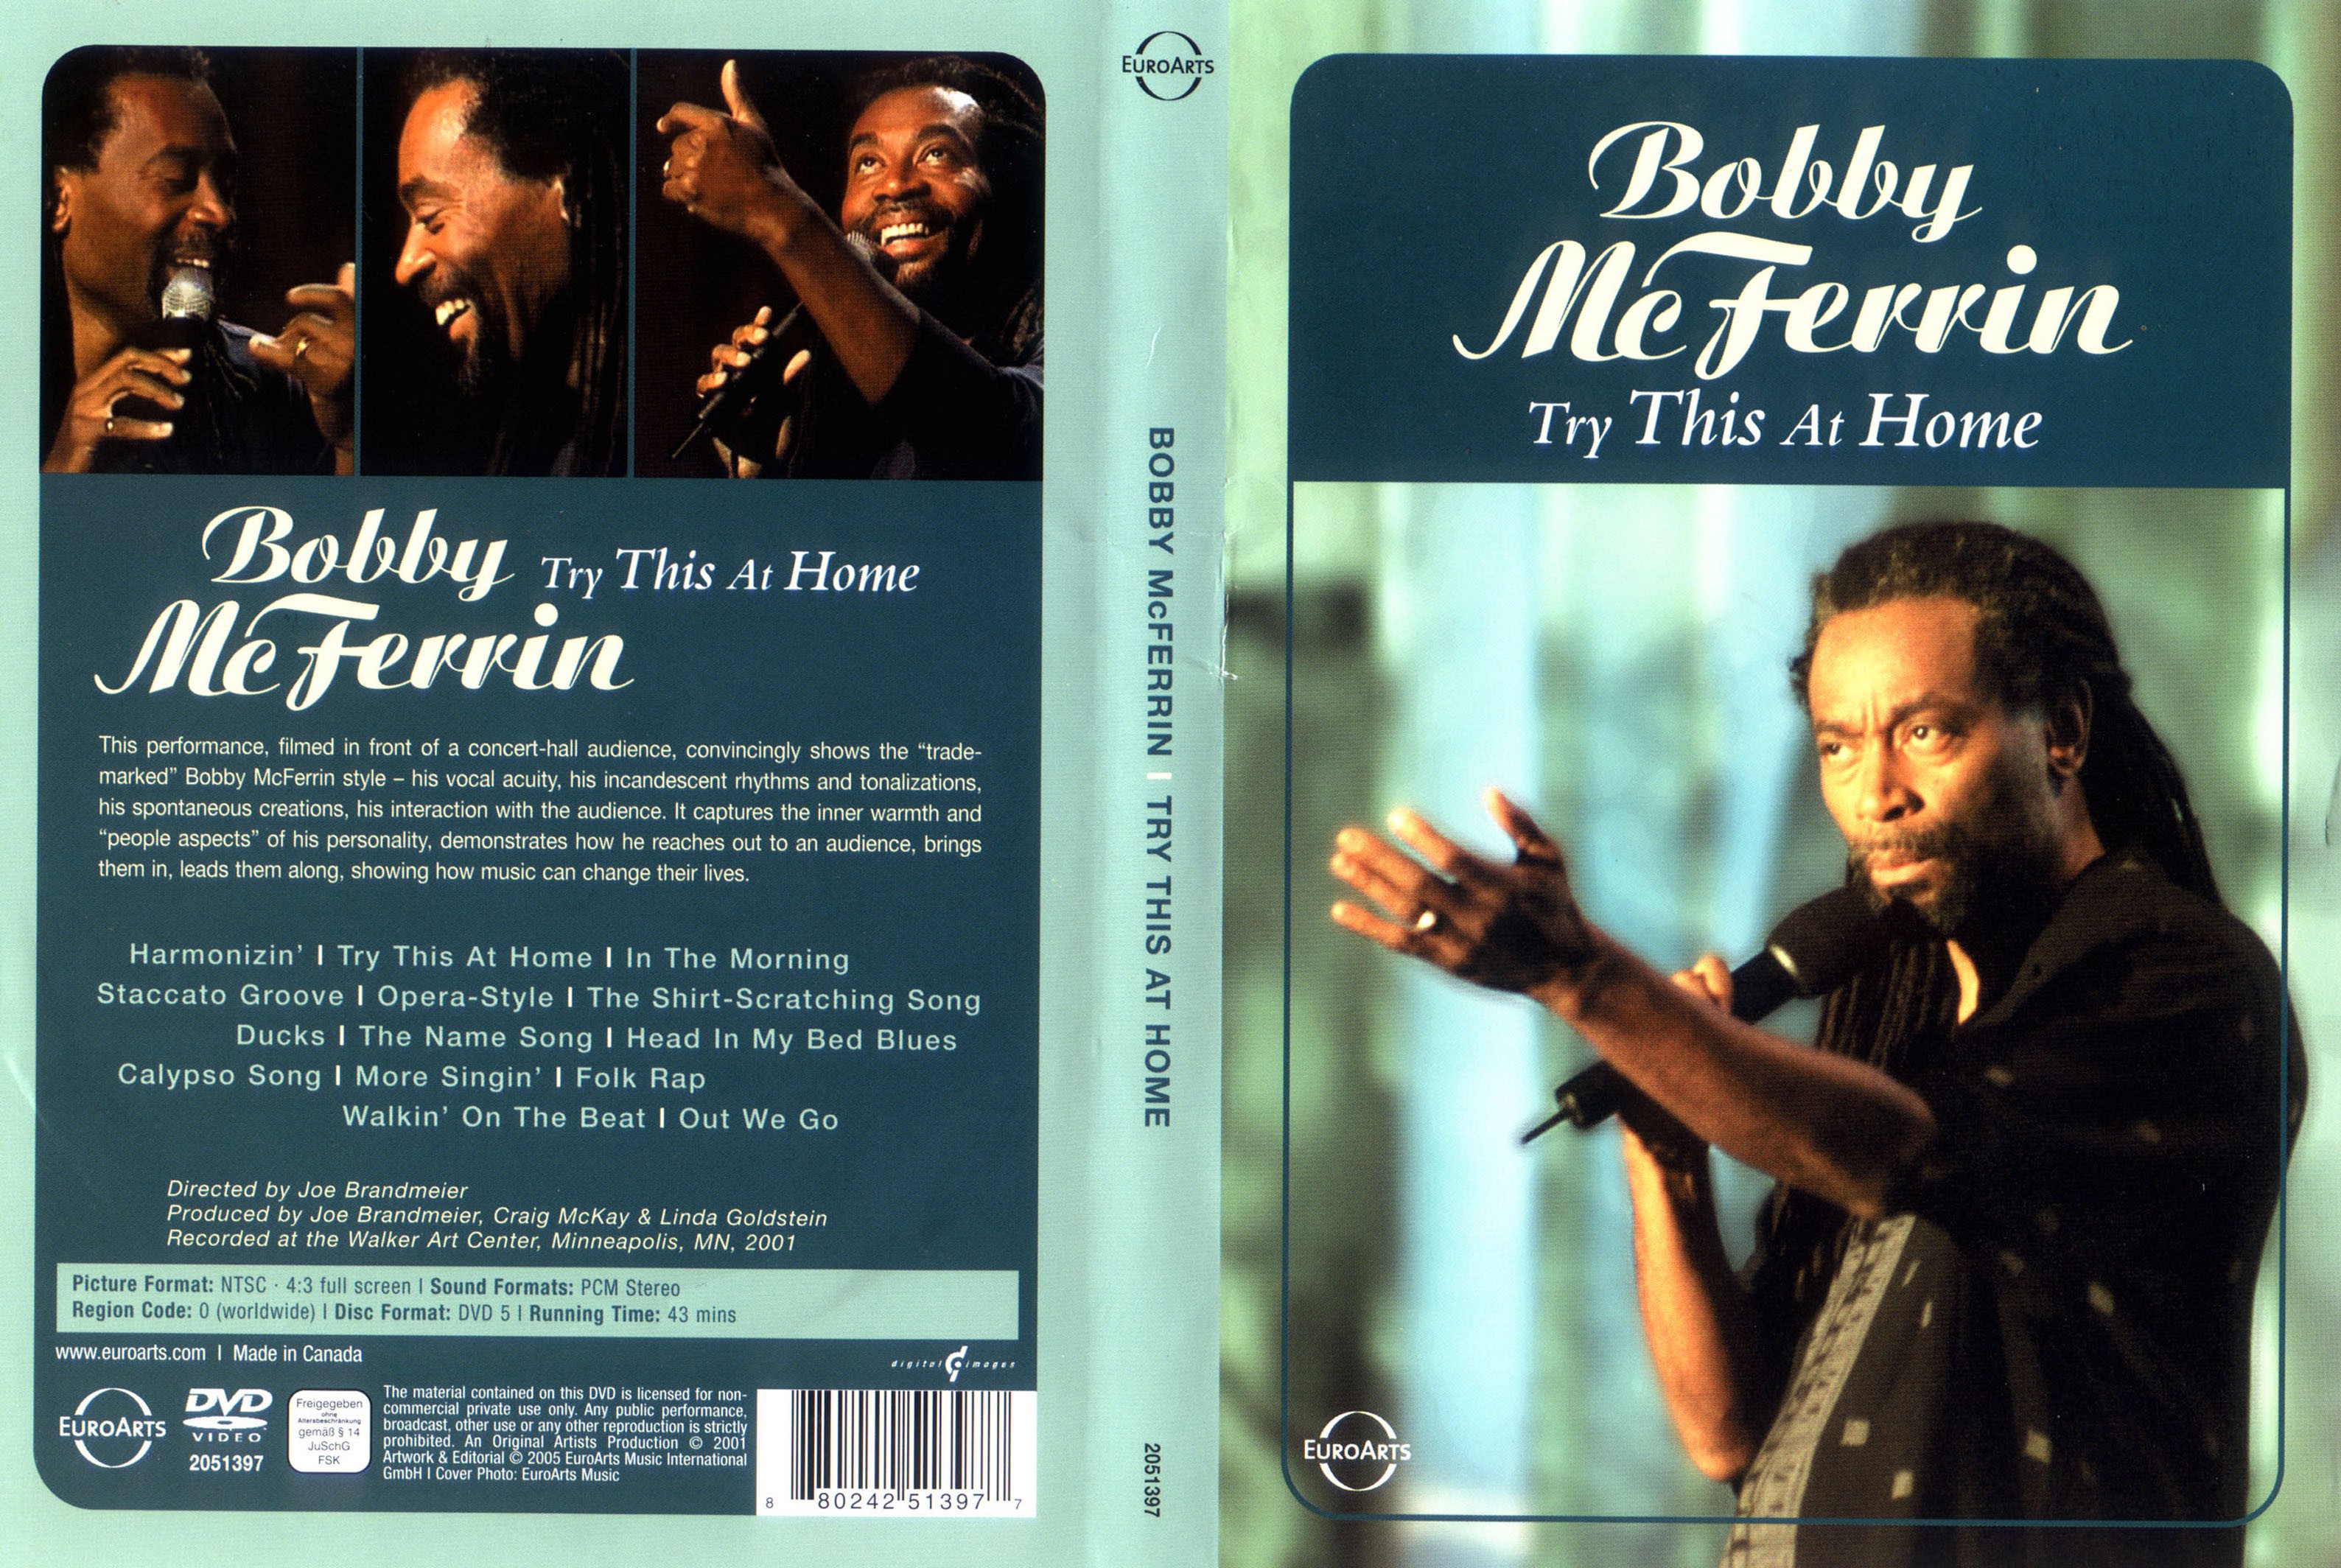 Jaquette DVD Bobby McFerrin try this at home